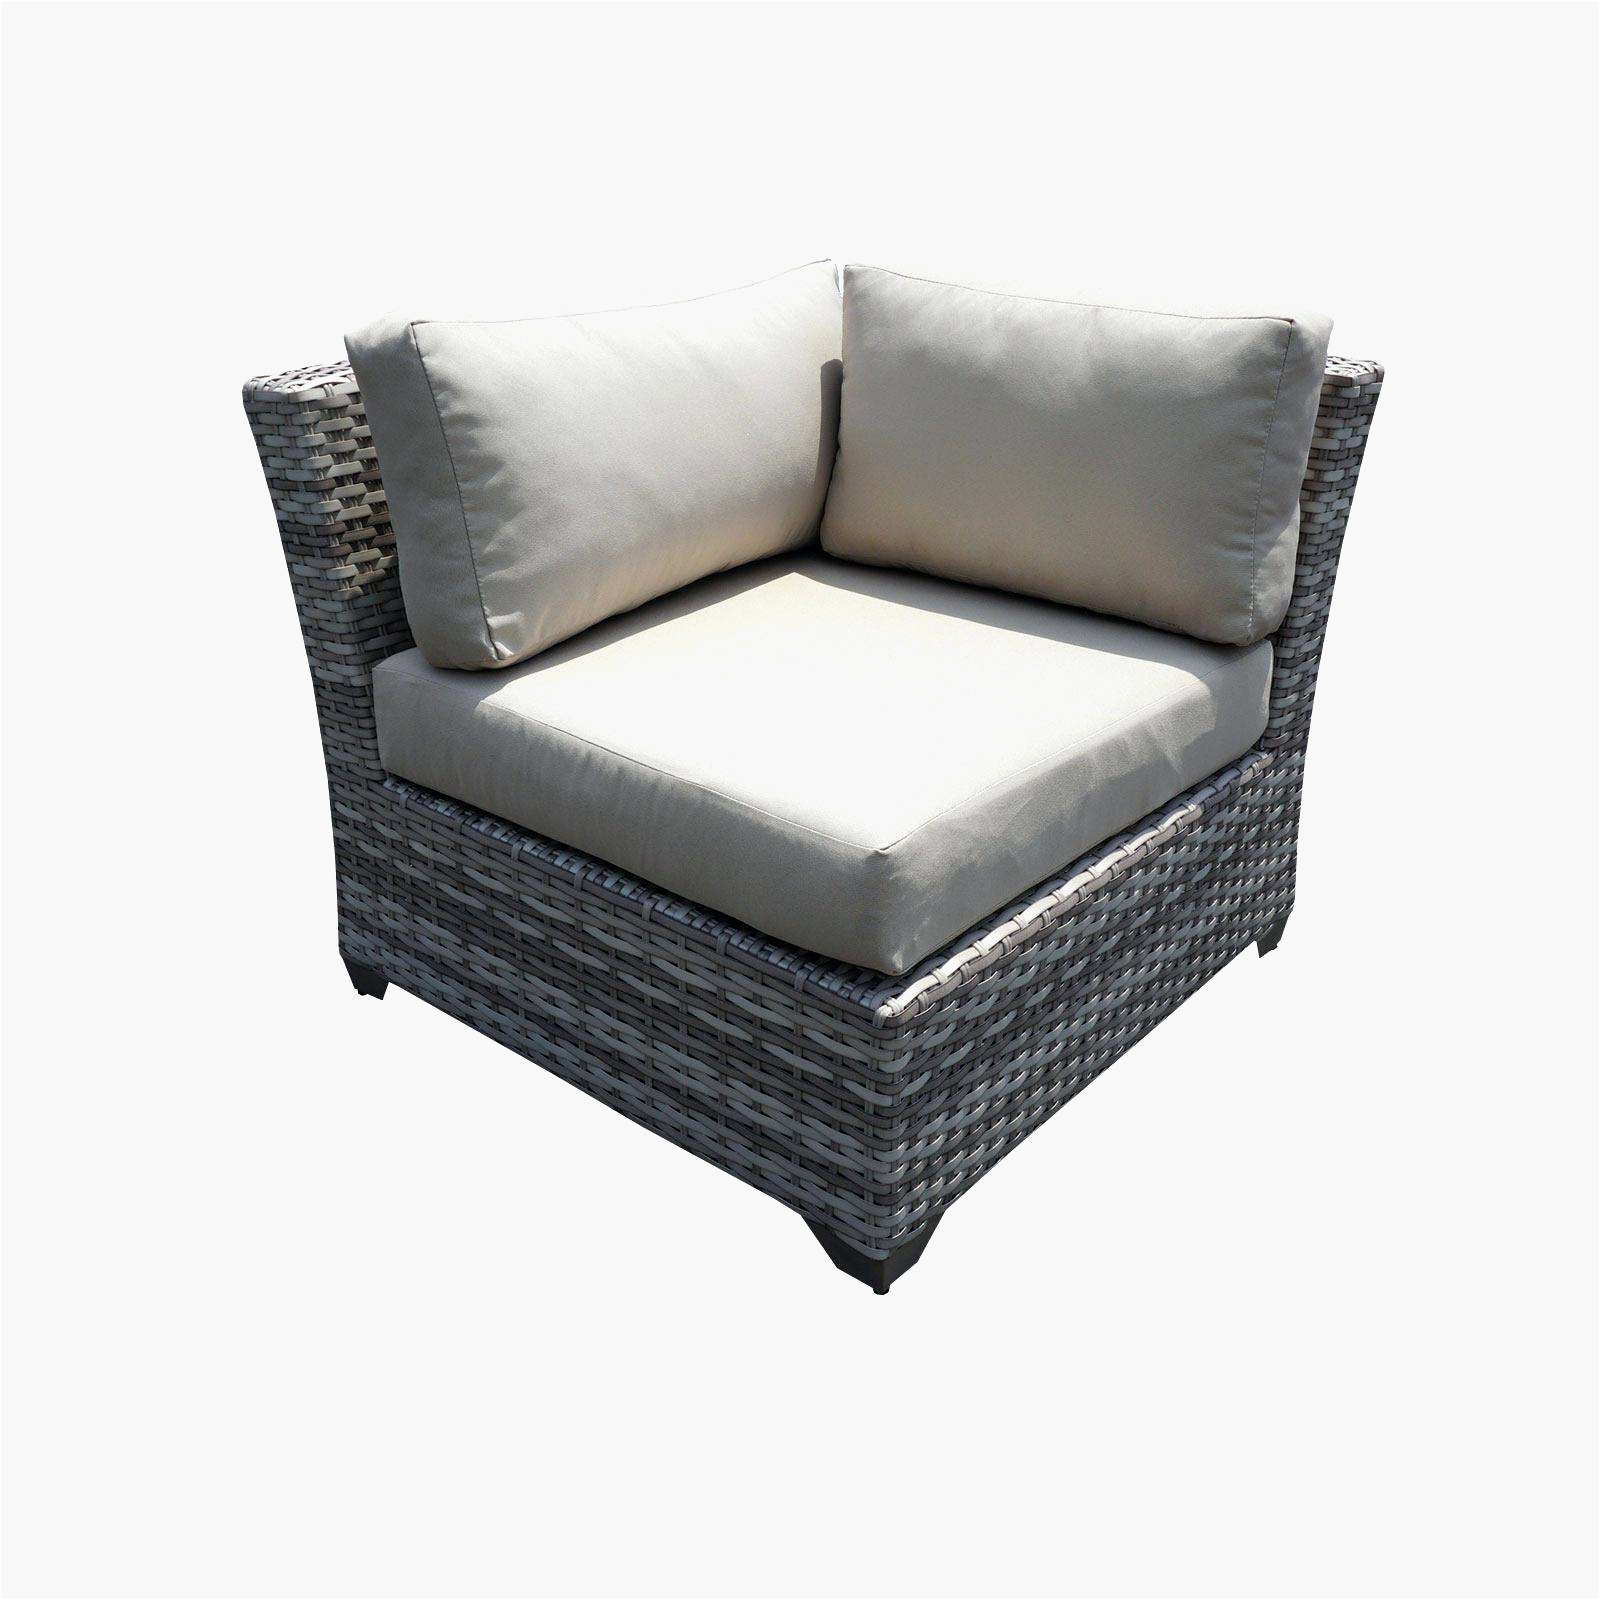 goodwill furniture for sale awesome chair hide a beds new wicker outdoor sofa 0d patio chairs